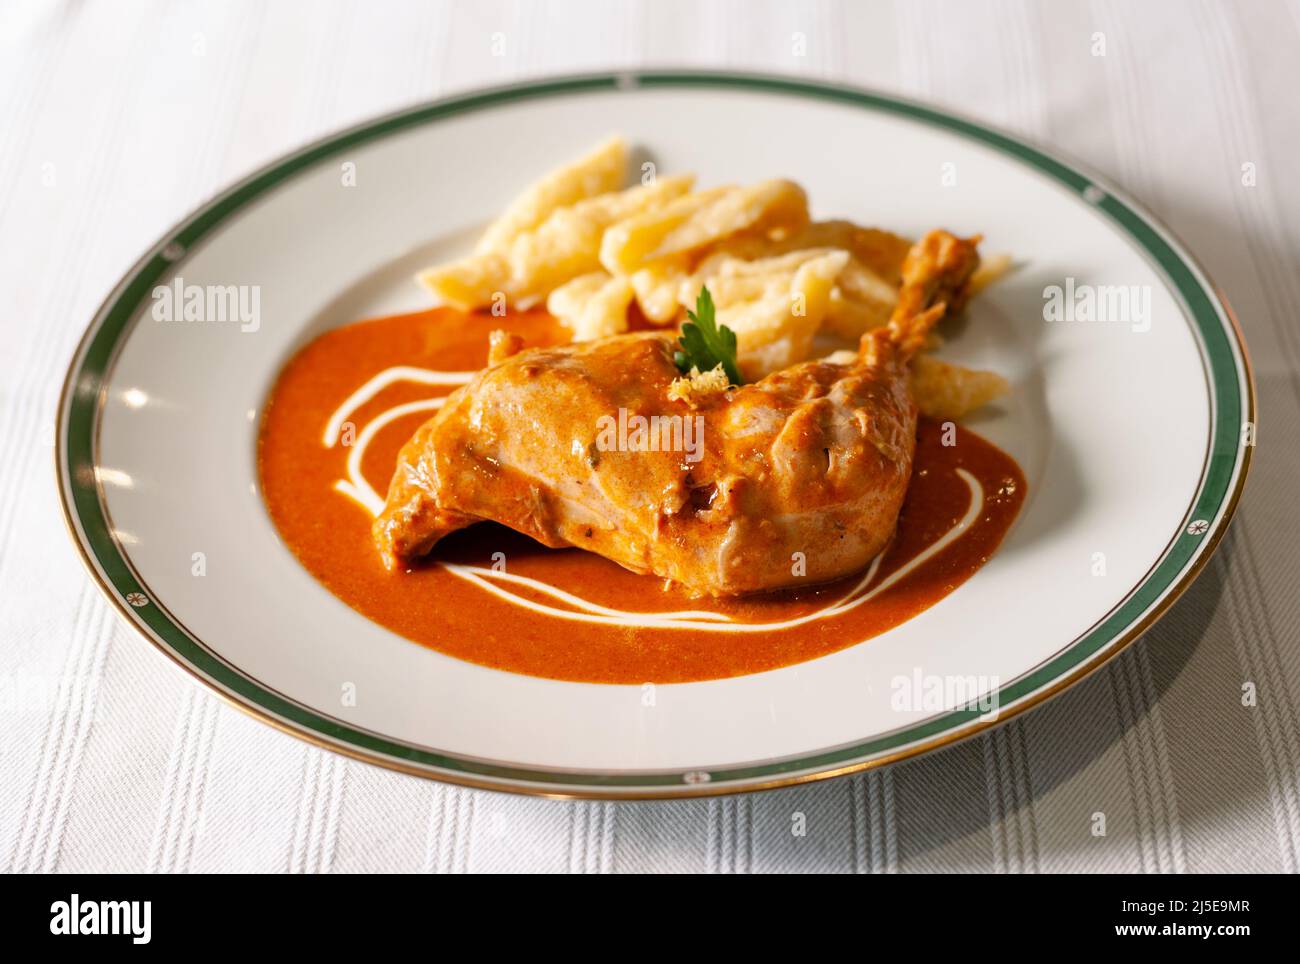 Hungarian Chicken Paprikash with Spaetzle, a Chicken Leg with Paprika Sauce and Small Dumplings Stock Photo